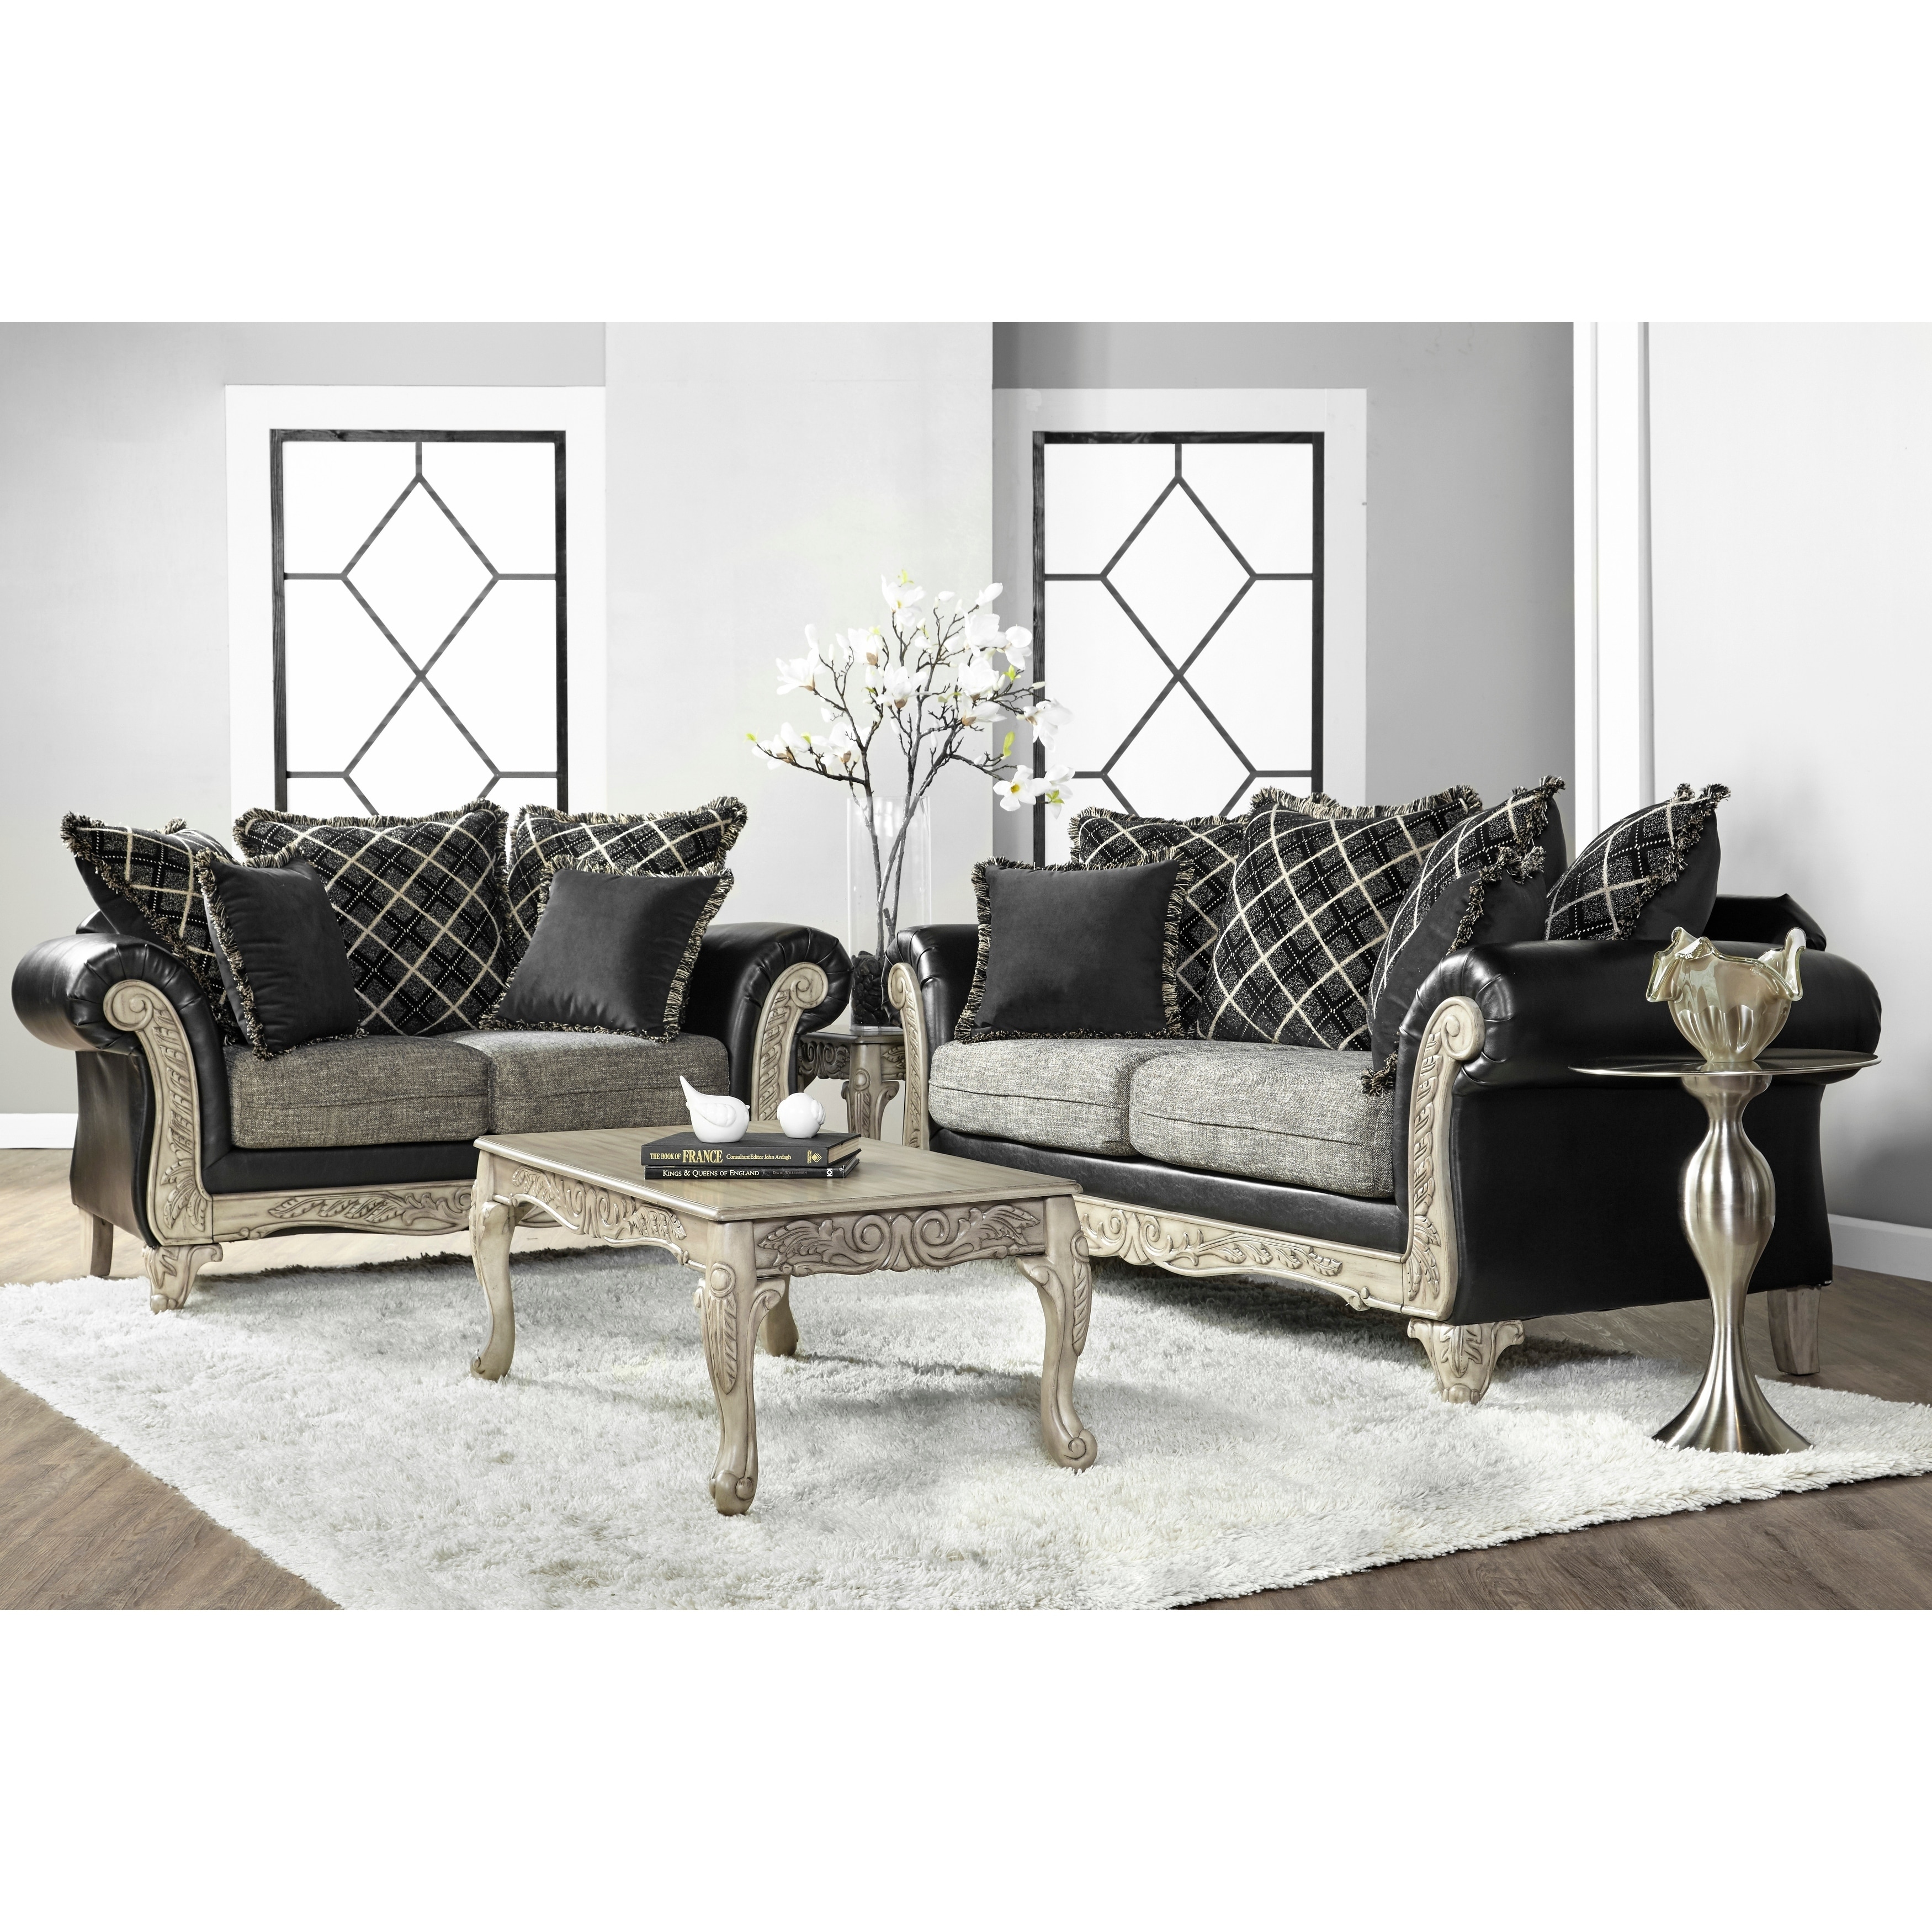 San Marino 2 Tone Fabric Wooden Frame Sofa And Loveseat With 3 Tables Set In Ebony On Sale Overstock 31028687